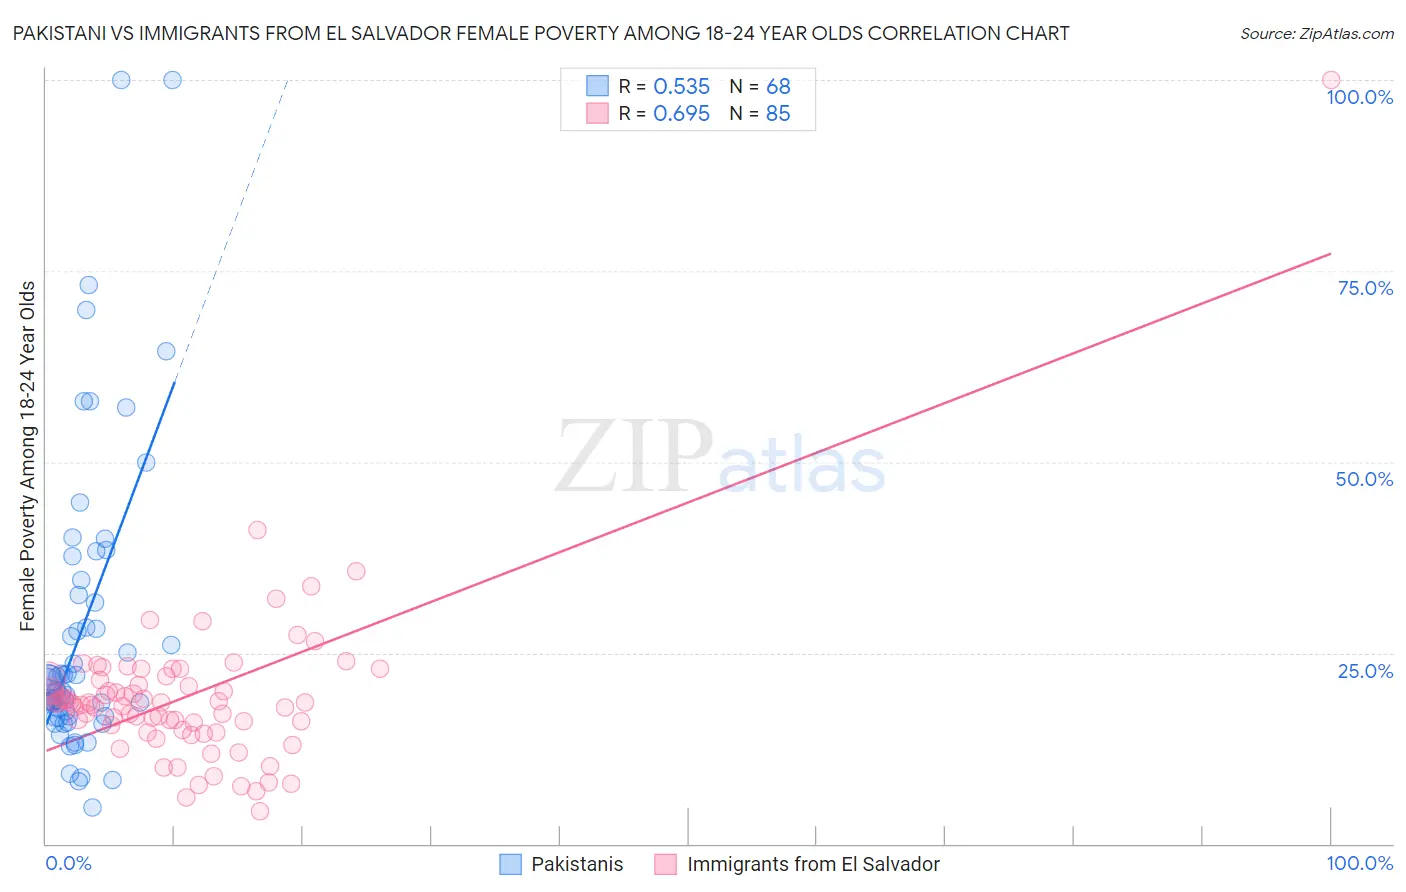 Pakistani vs Immigrants from El Salvador Female Poverty Among 18-24 Year Olds